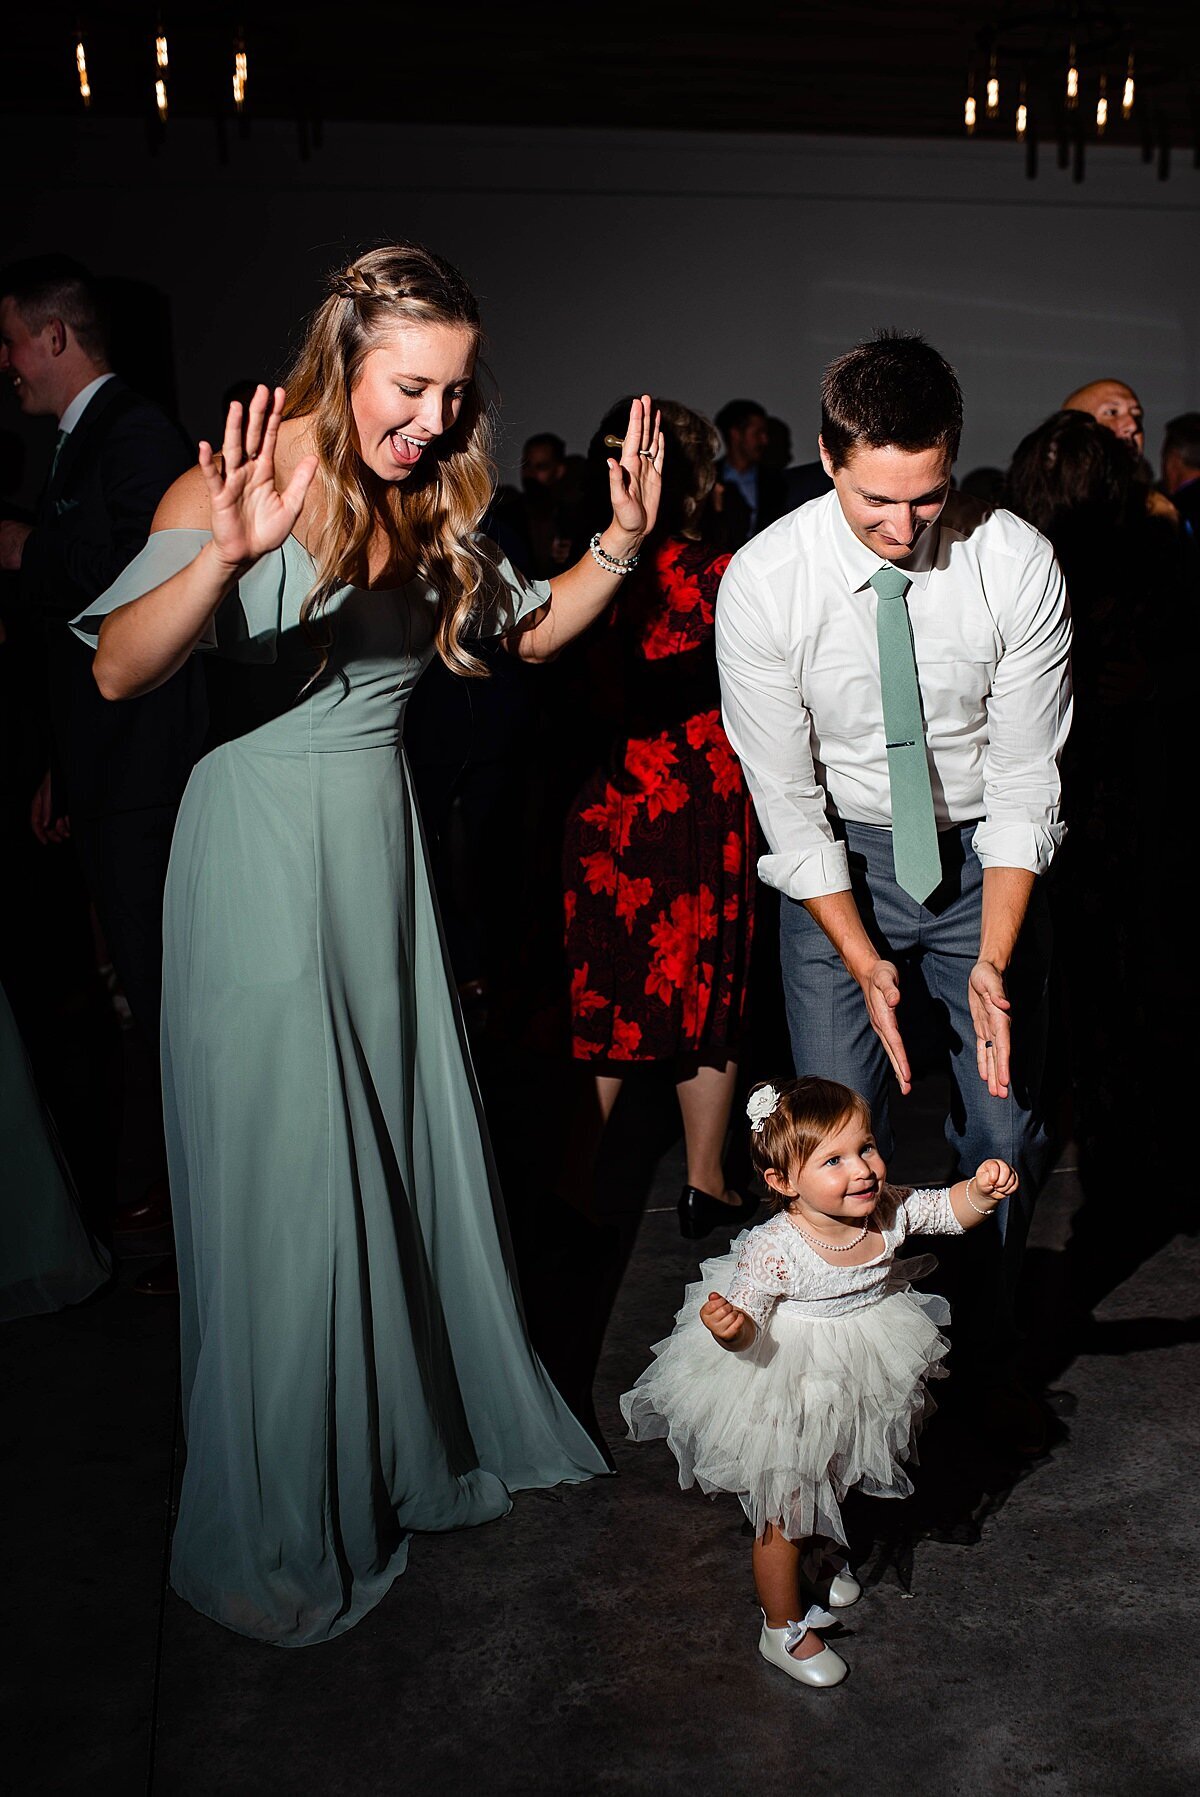 Flowergirl wearing tulle skirt dancing with her mom and dad on the dance floor at Cranford Hollow